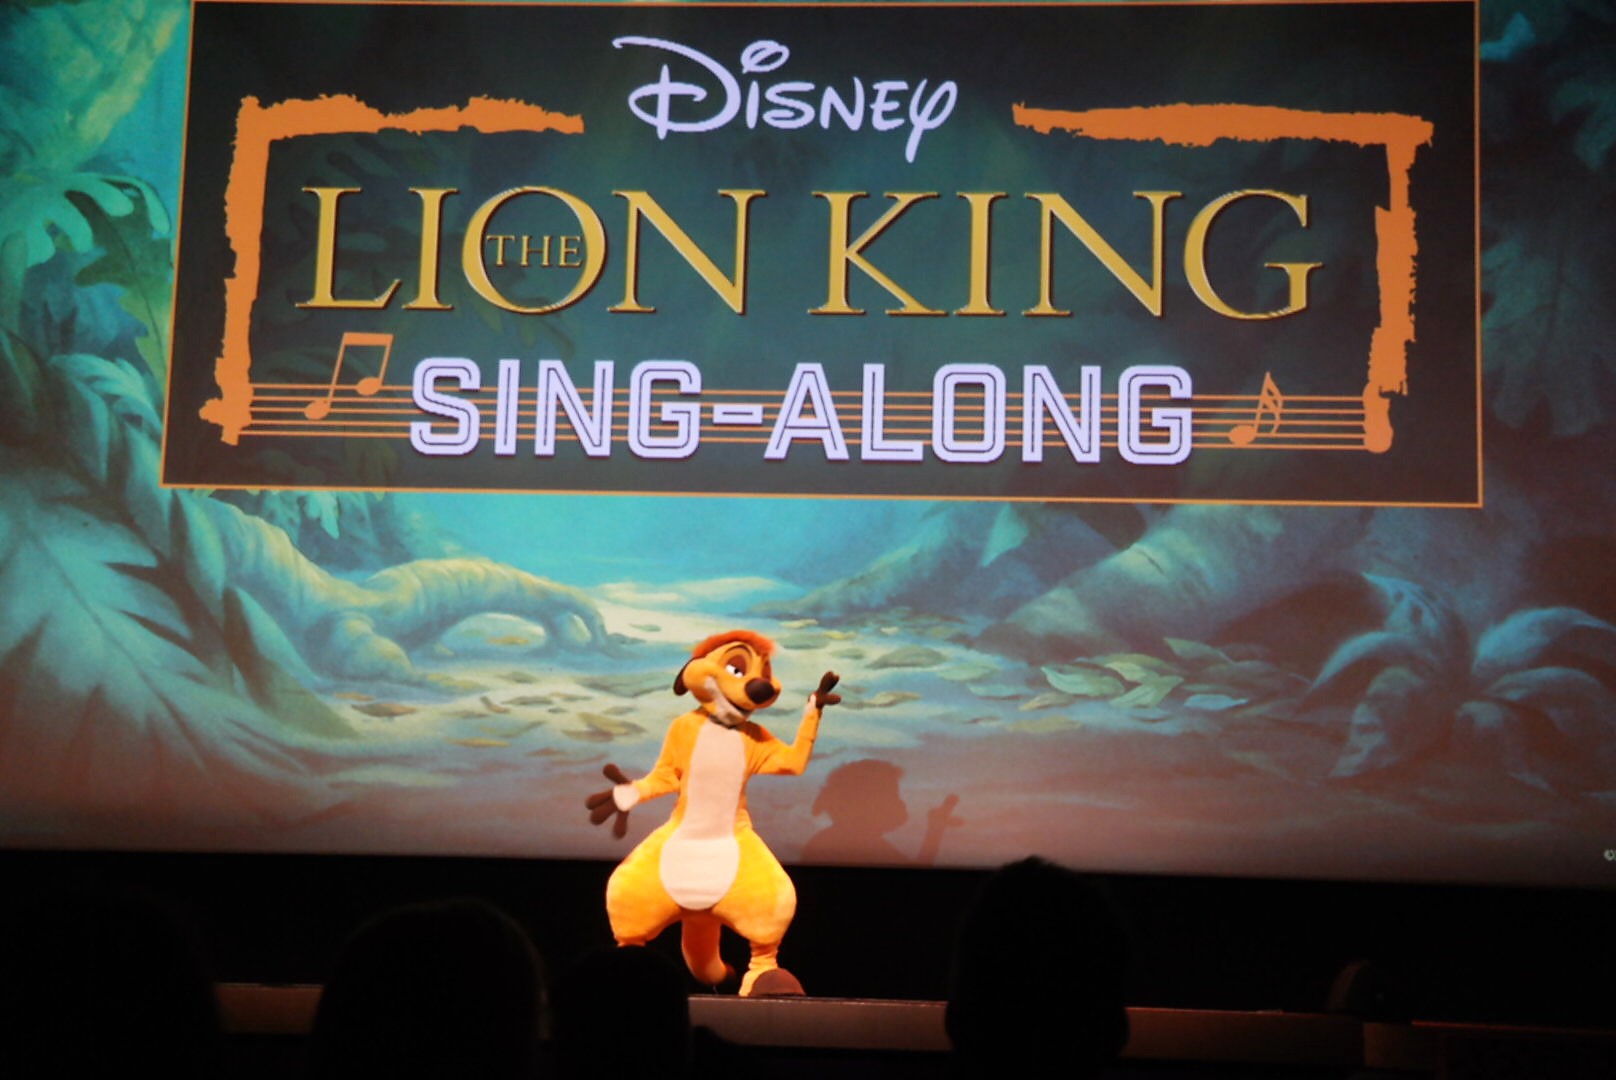 The Lion King sing a long, breakfast with timon, el capitan theatre, hollywood movie theaters